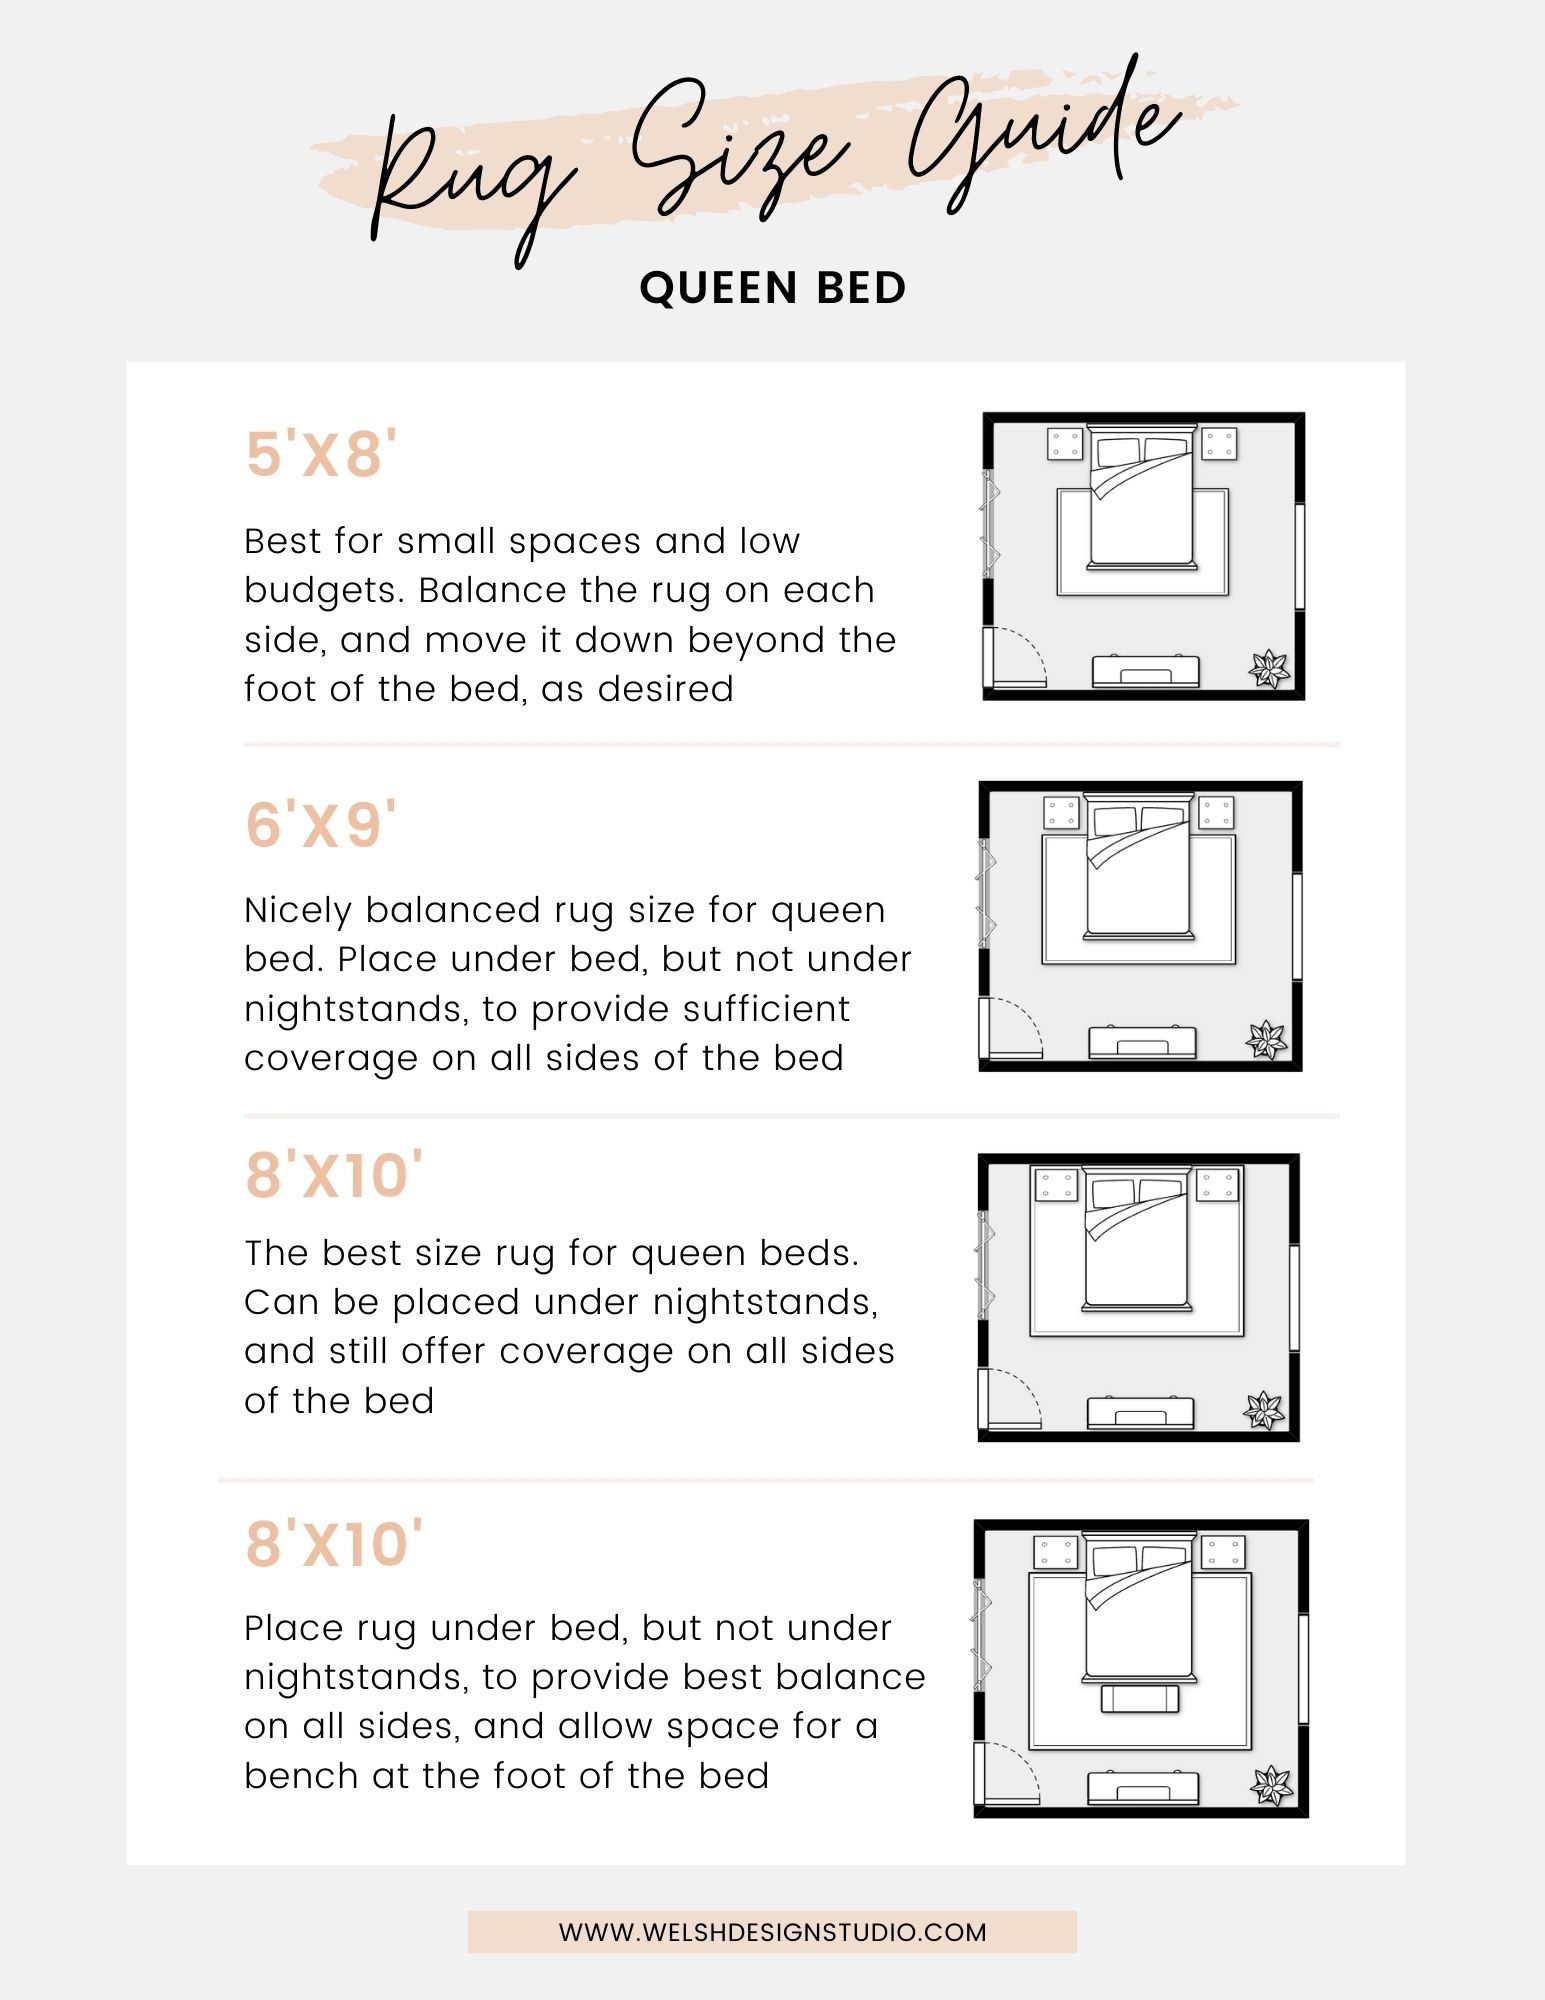 The Best Rug Size for a Queen Bed - Welsh Design Studio